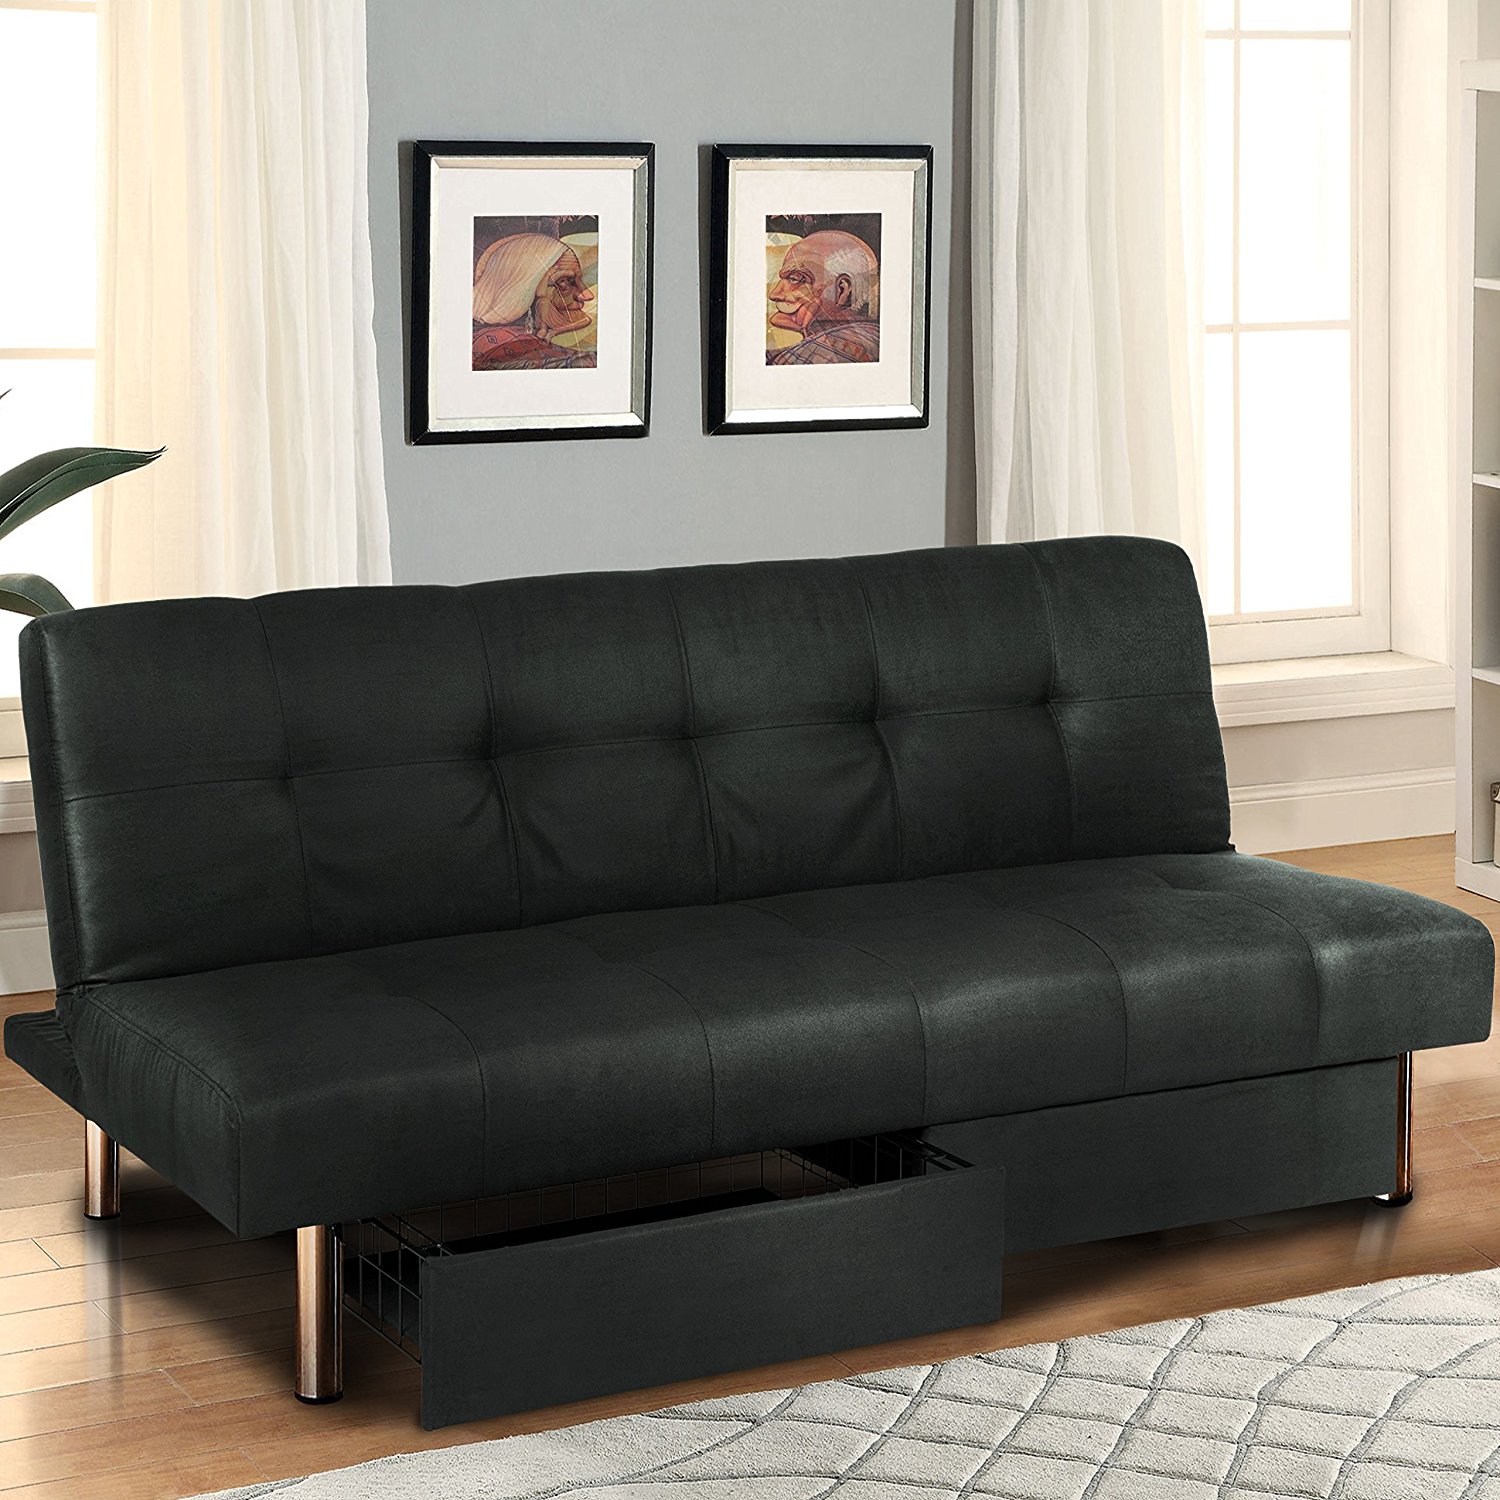 The Stylish futon sofa for one and all